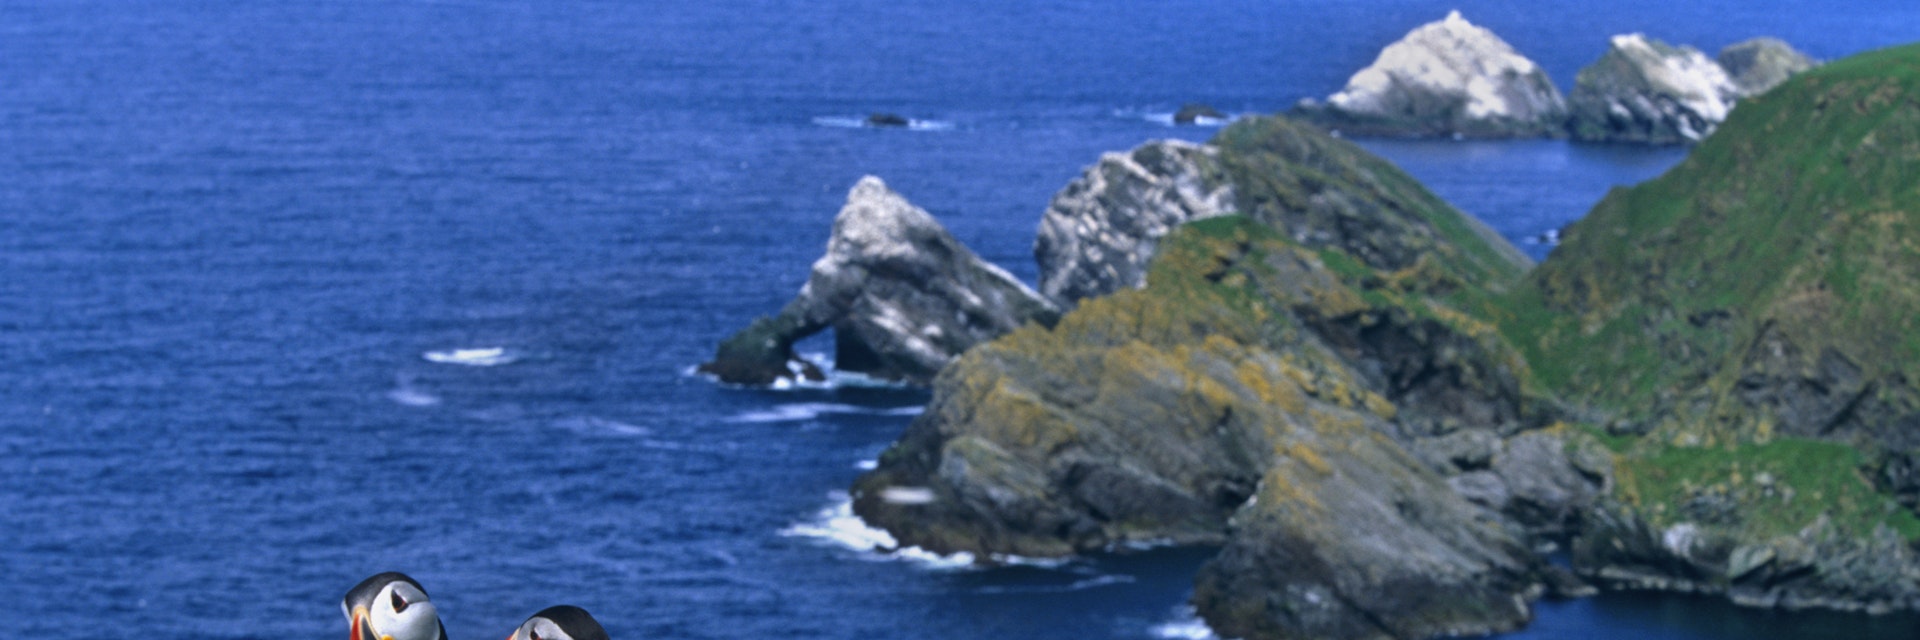 Herma Ness is the northernmost headland of Unst. It is a National Nature Reserve.